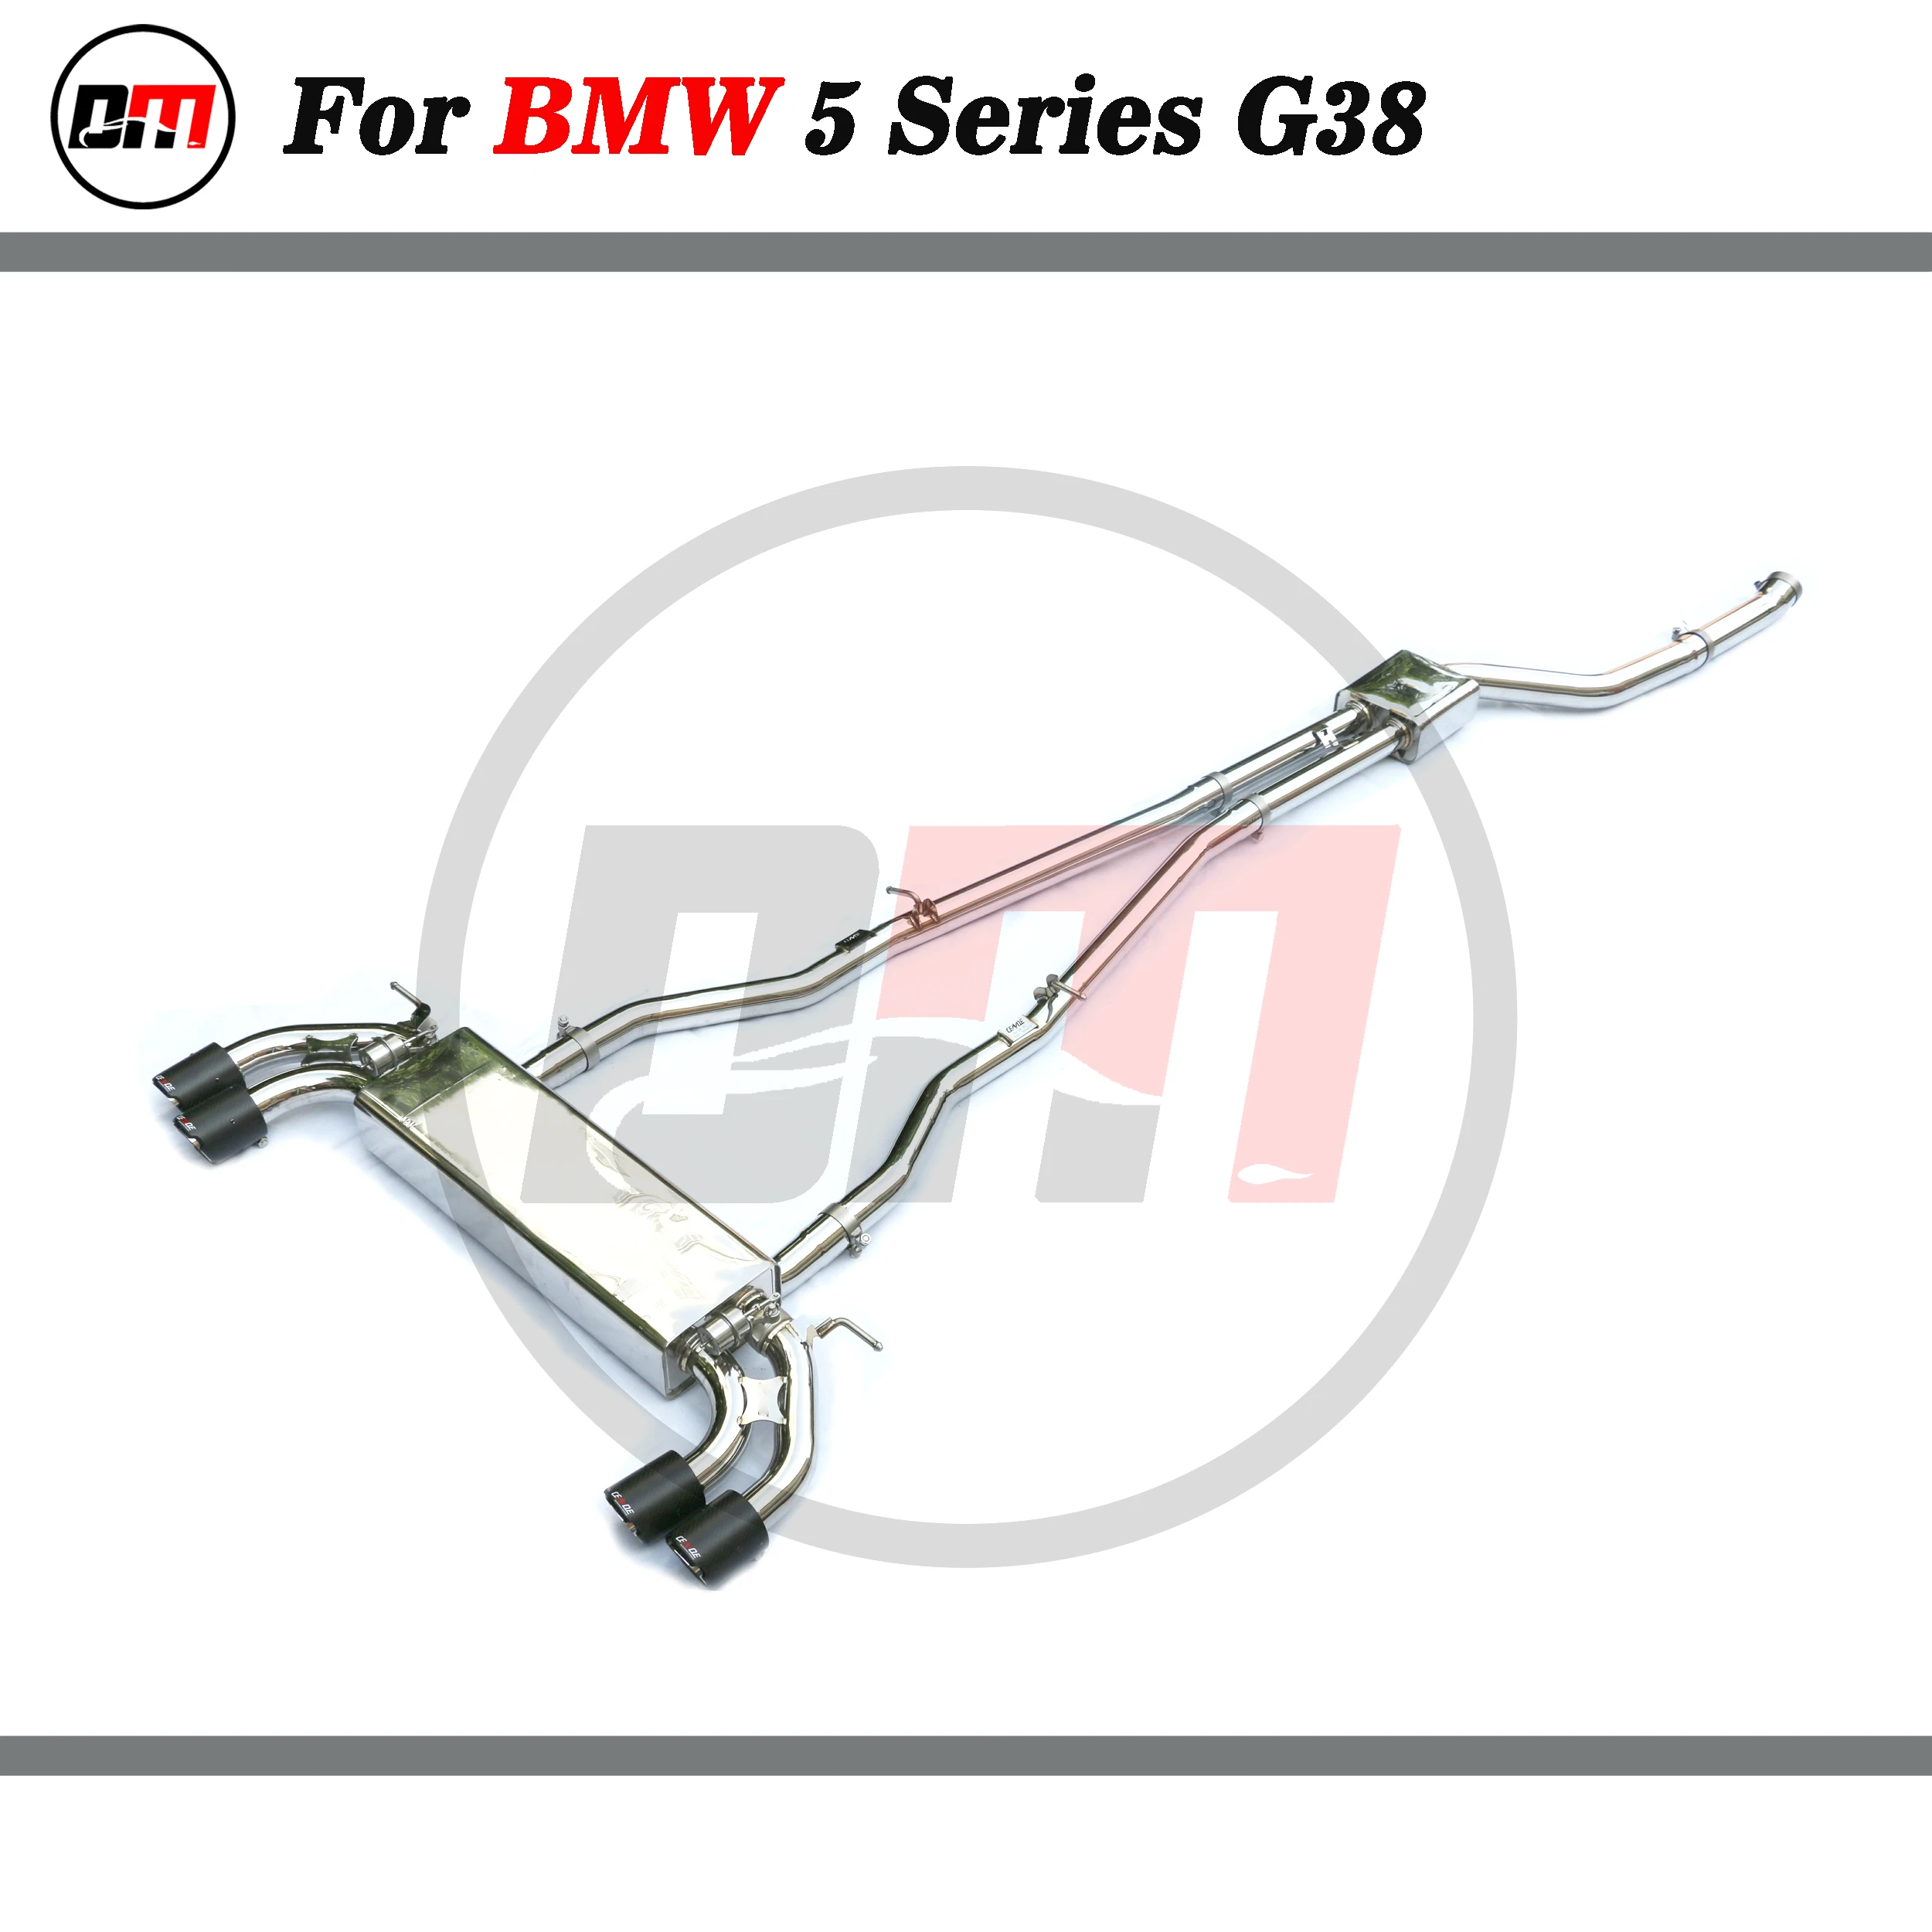 

DM exhaust stainless steel catback exhaust system for BMW 5 series 540i G30 G38 with valve muffler exhaust pipe performance